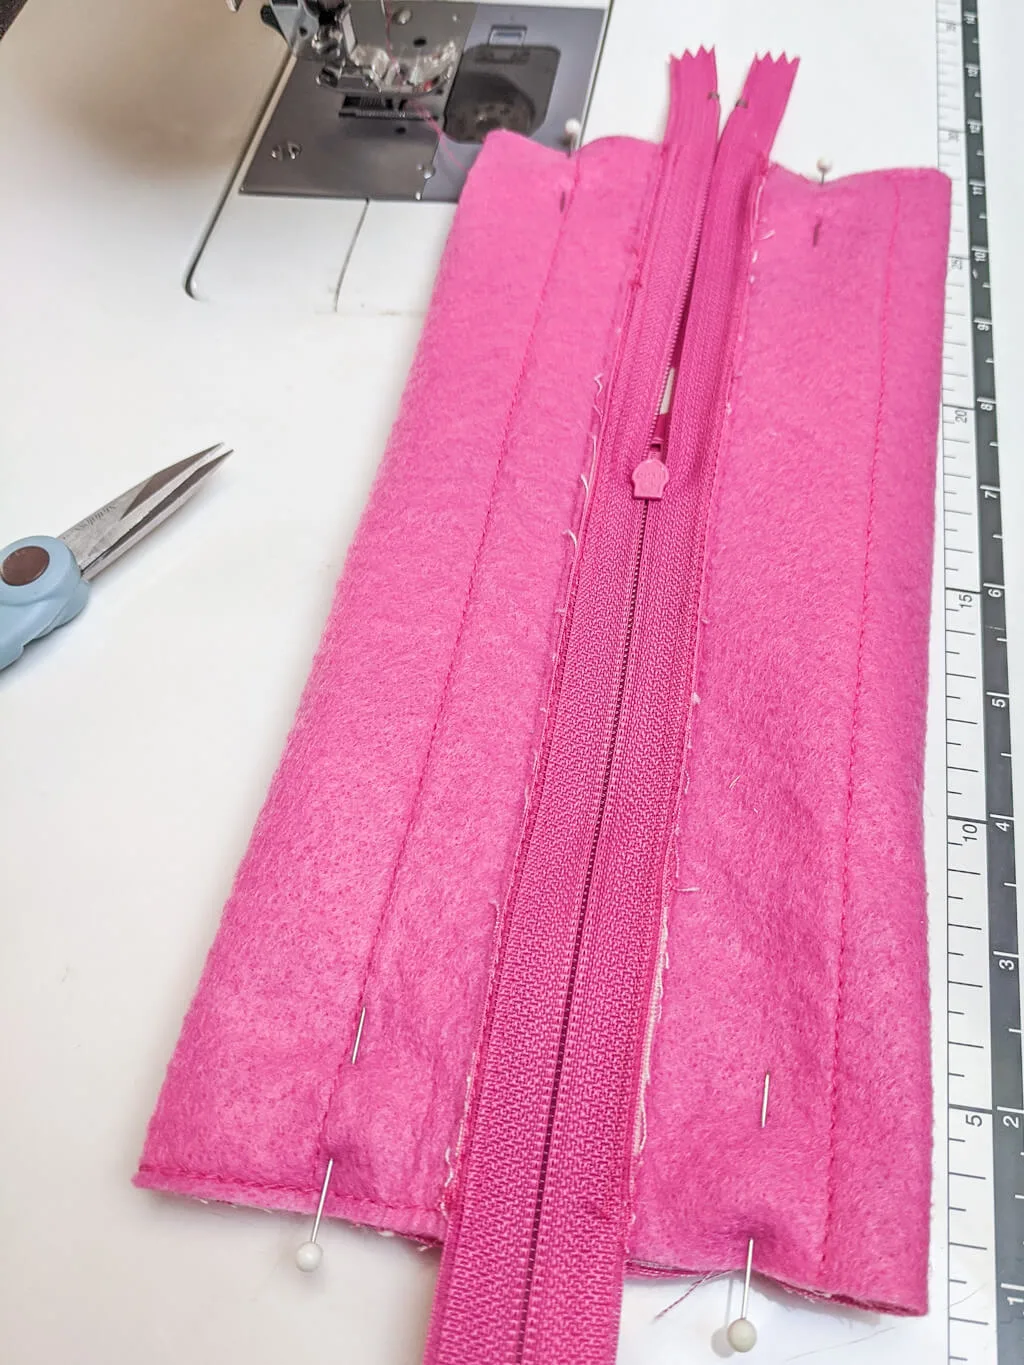 Sewing a lined zipper pencil case pouch